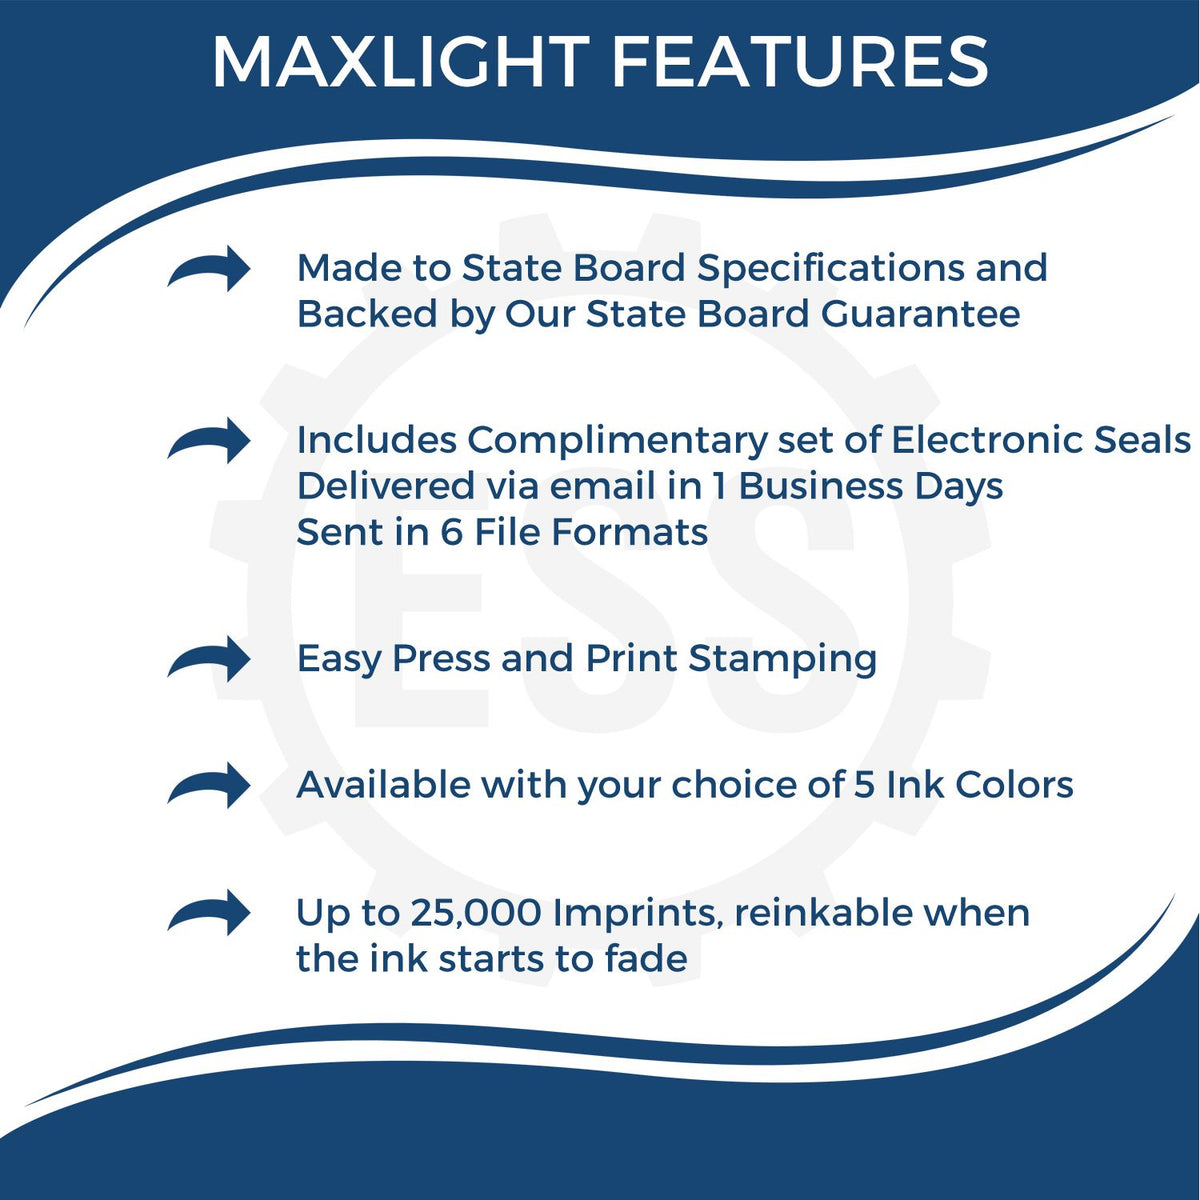 A picture of an infographic highlighting the selling points for the Premium MaxLight Pre-Inked New York Geology Stamp